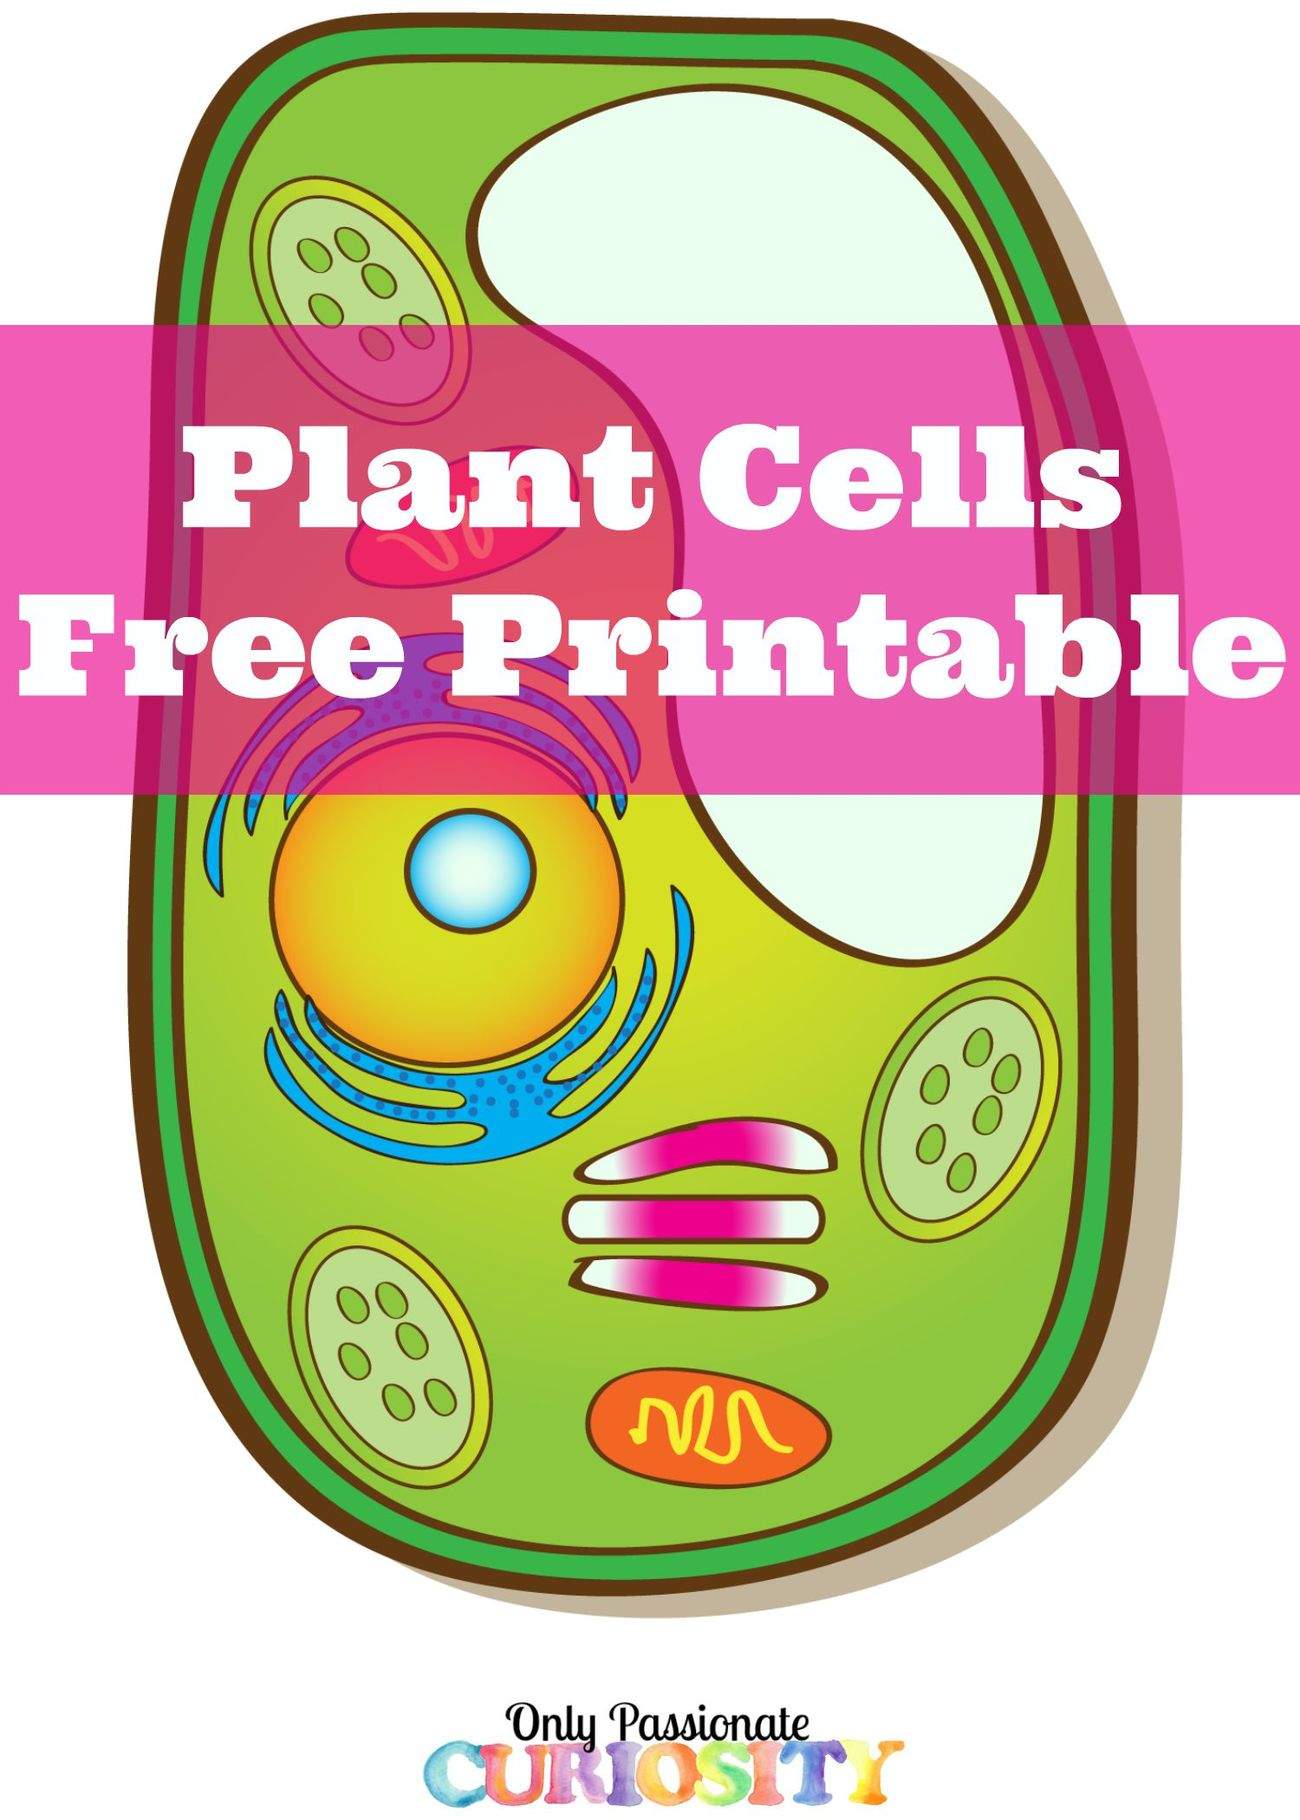 Learning about plant cells free printable